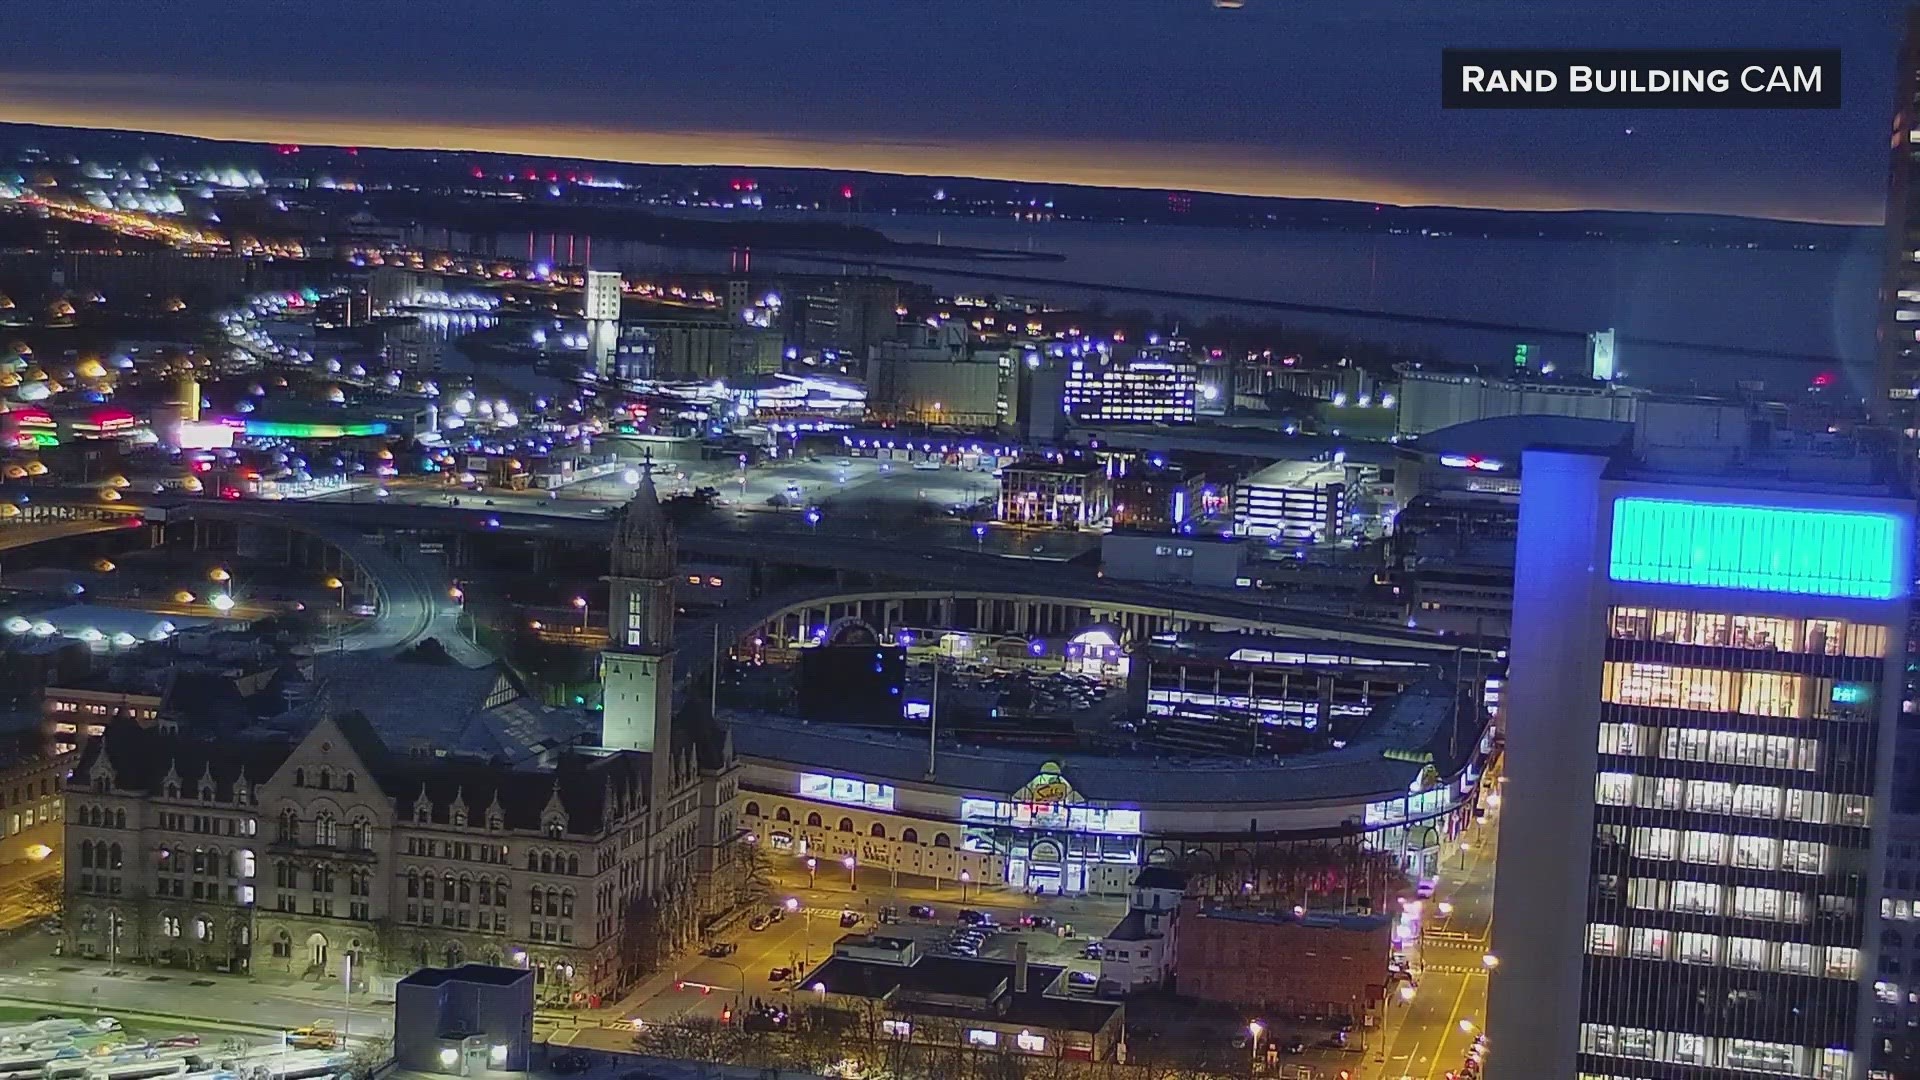 Here's how the total solar eclipse looked in downtown Buffalo